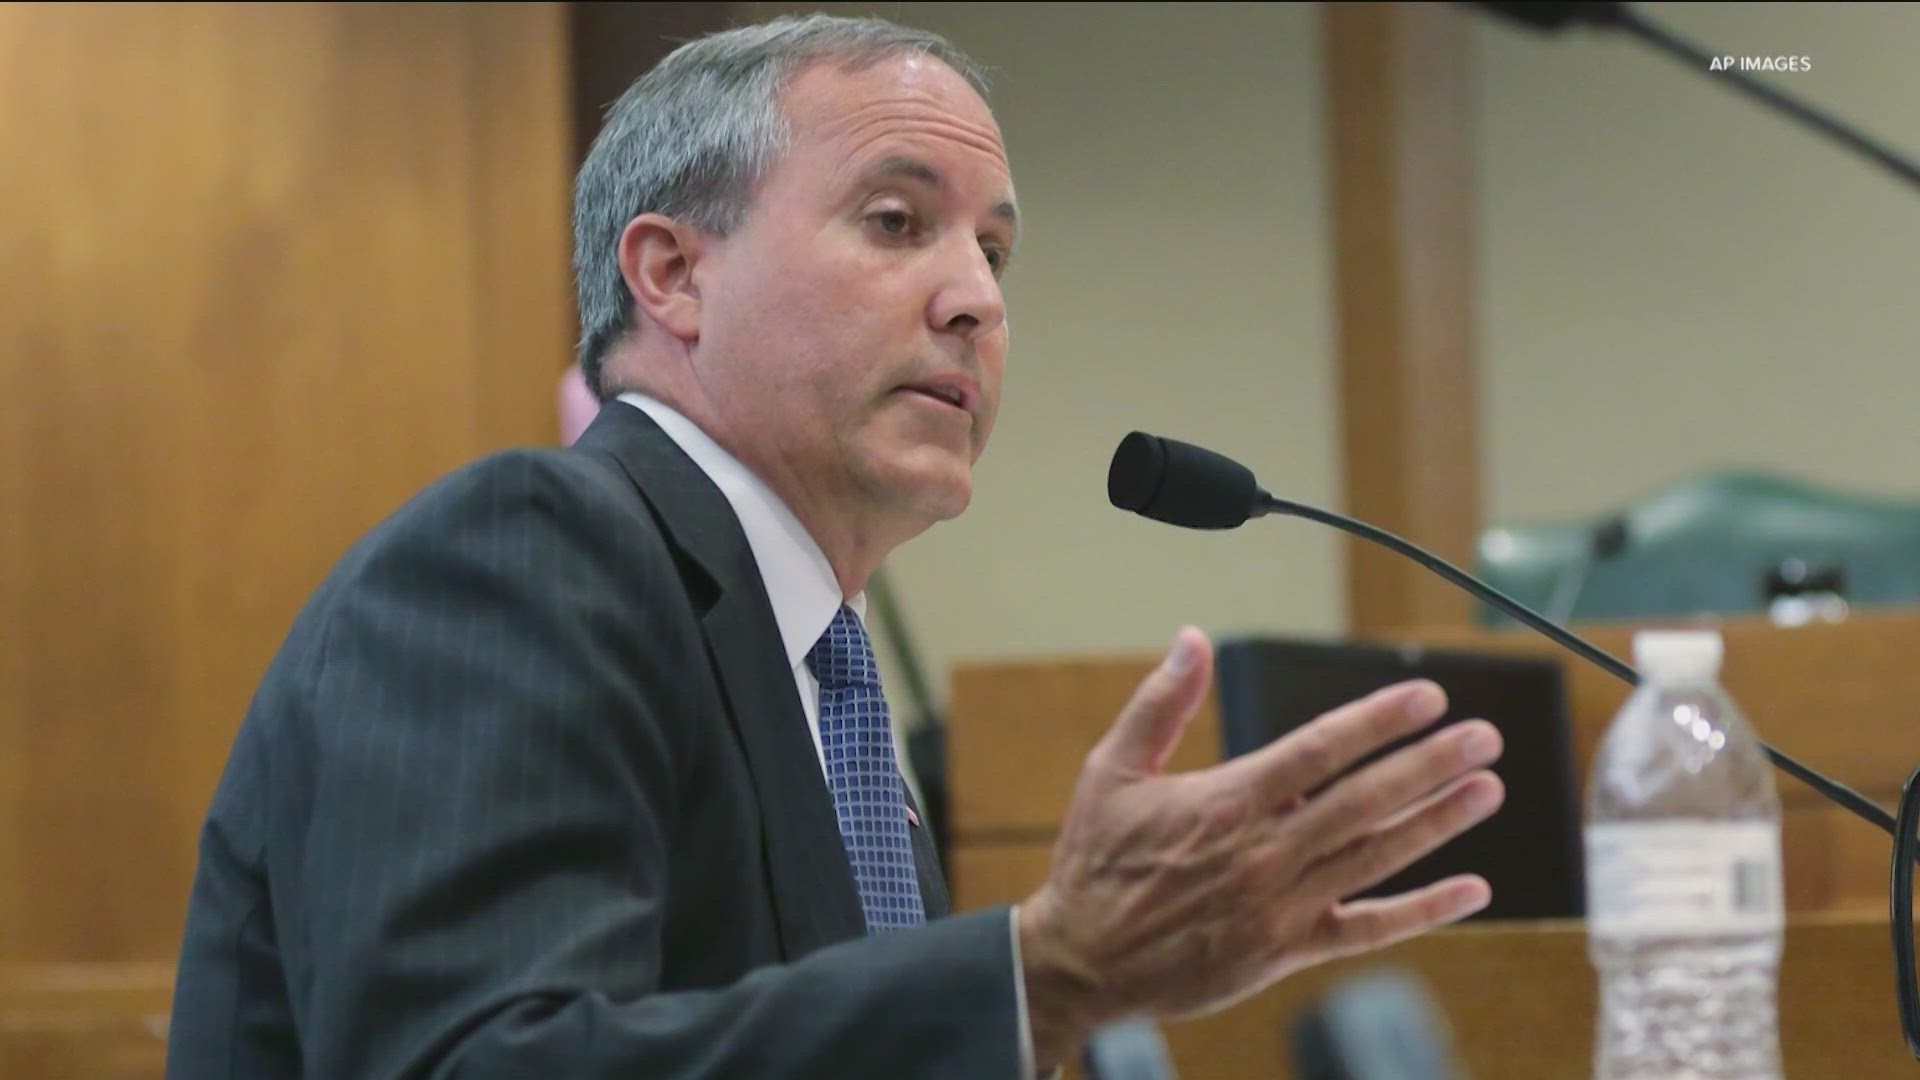 The Senate, which is conducting the trial, published the exhibits Thursday night. House managers say Paxton abused his office to help political donor Nate Paul.